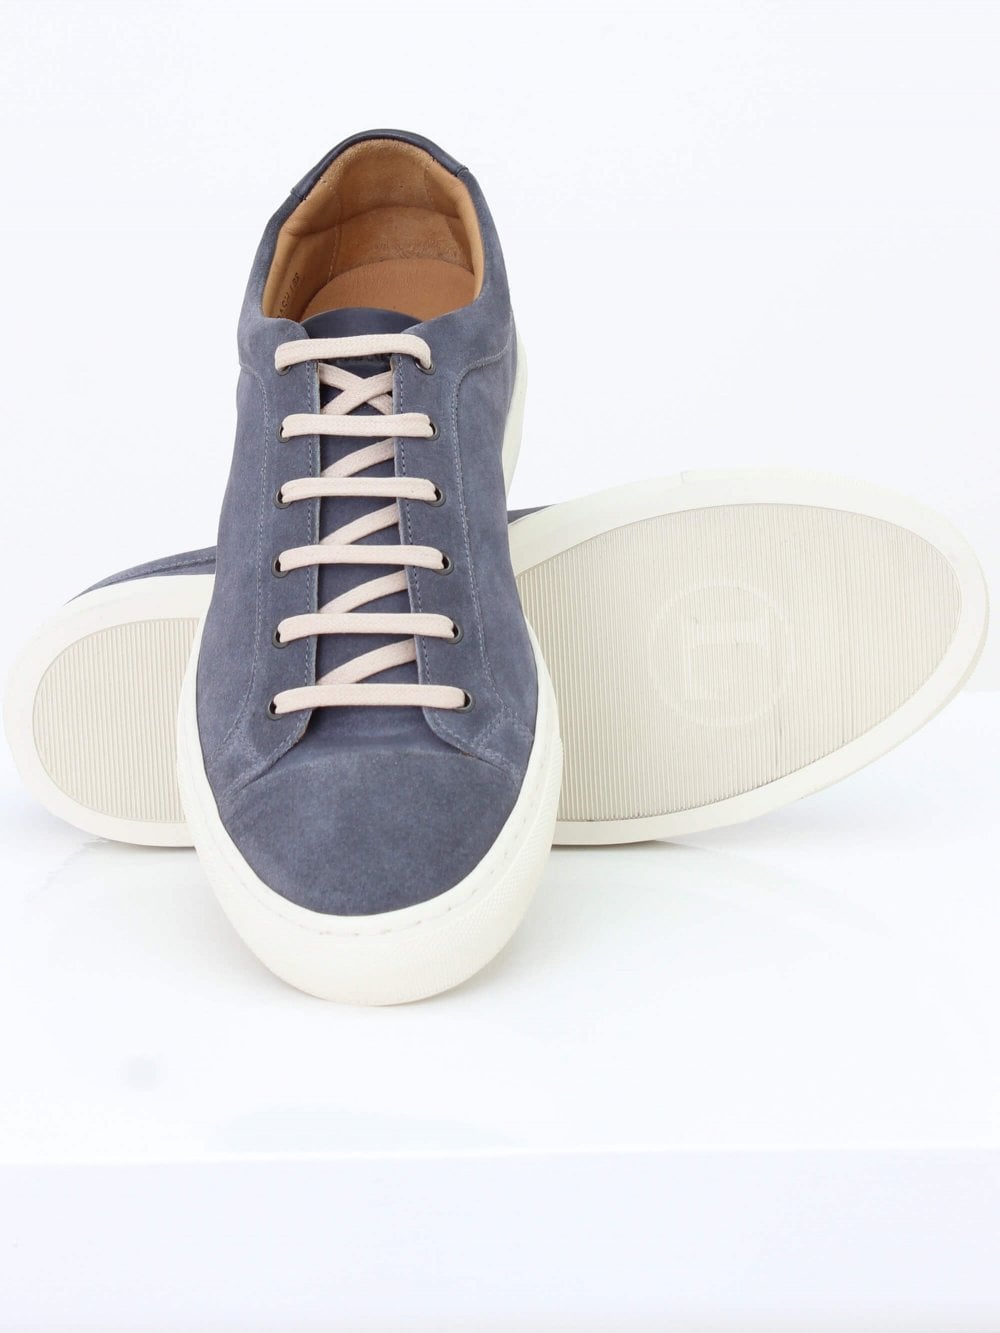 Loake Dash Trainers - Light Blue Suede